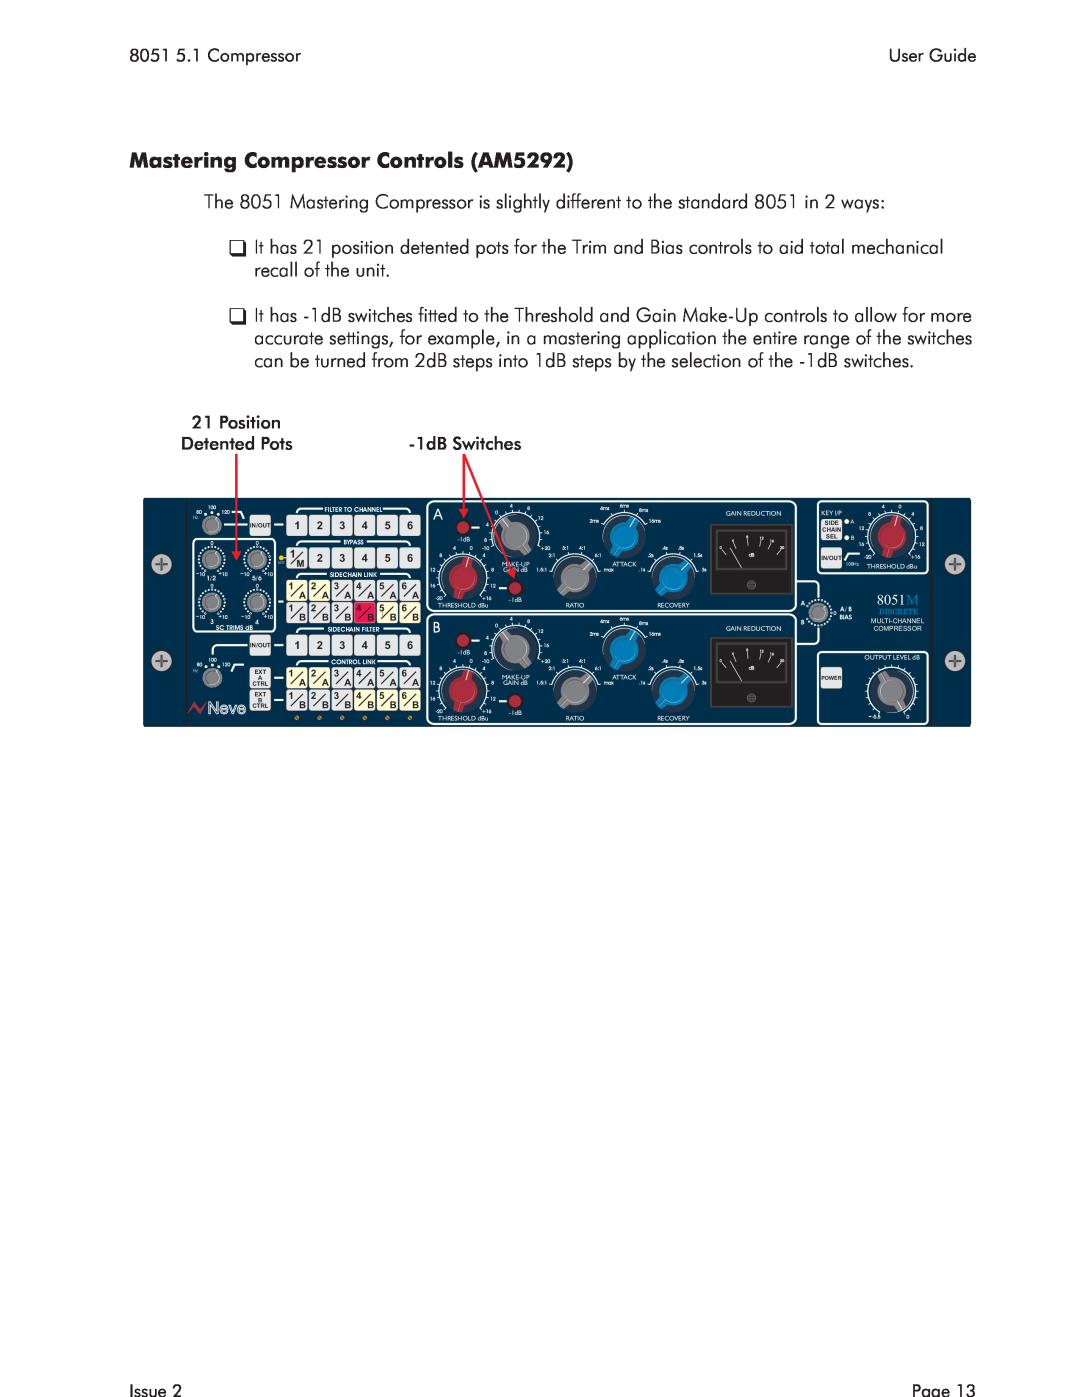 AMS Mastering Compressor Controls AM5292, 8051 5.1 Compressor, User Guide, Position, Detented Pots, 1dBSwitches, Issue 